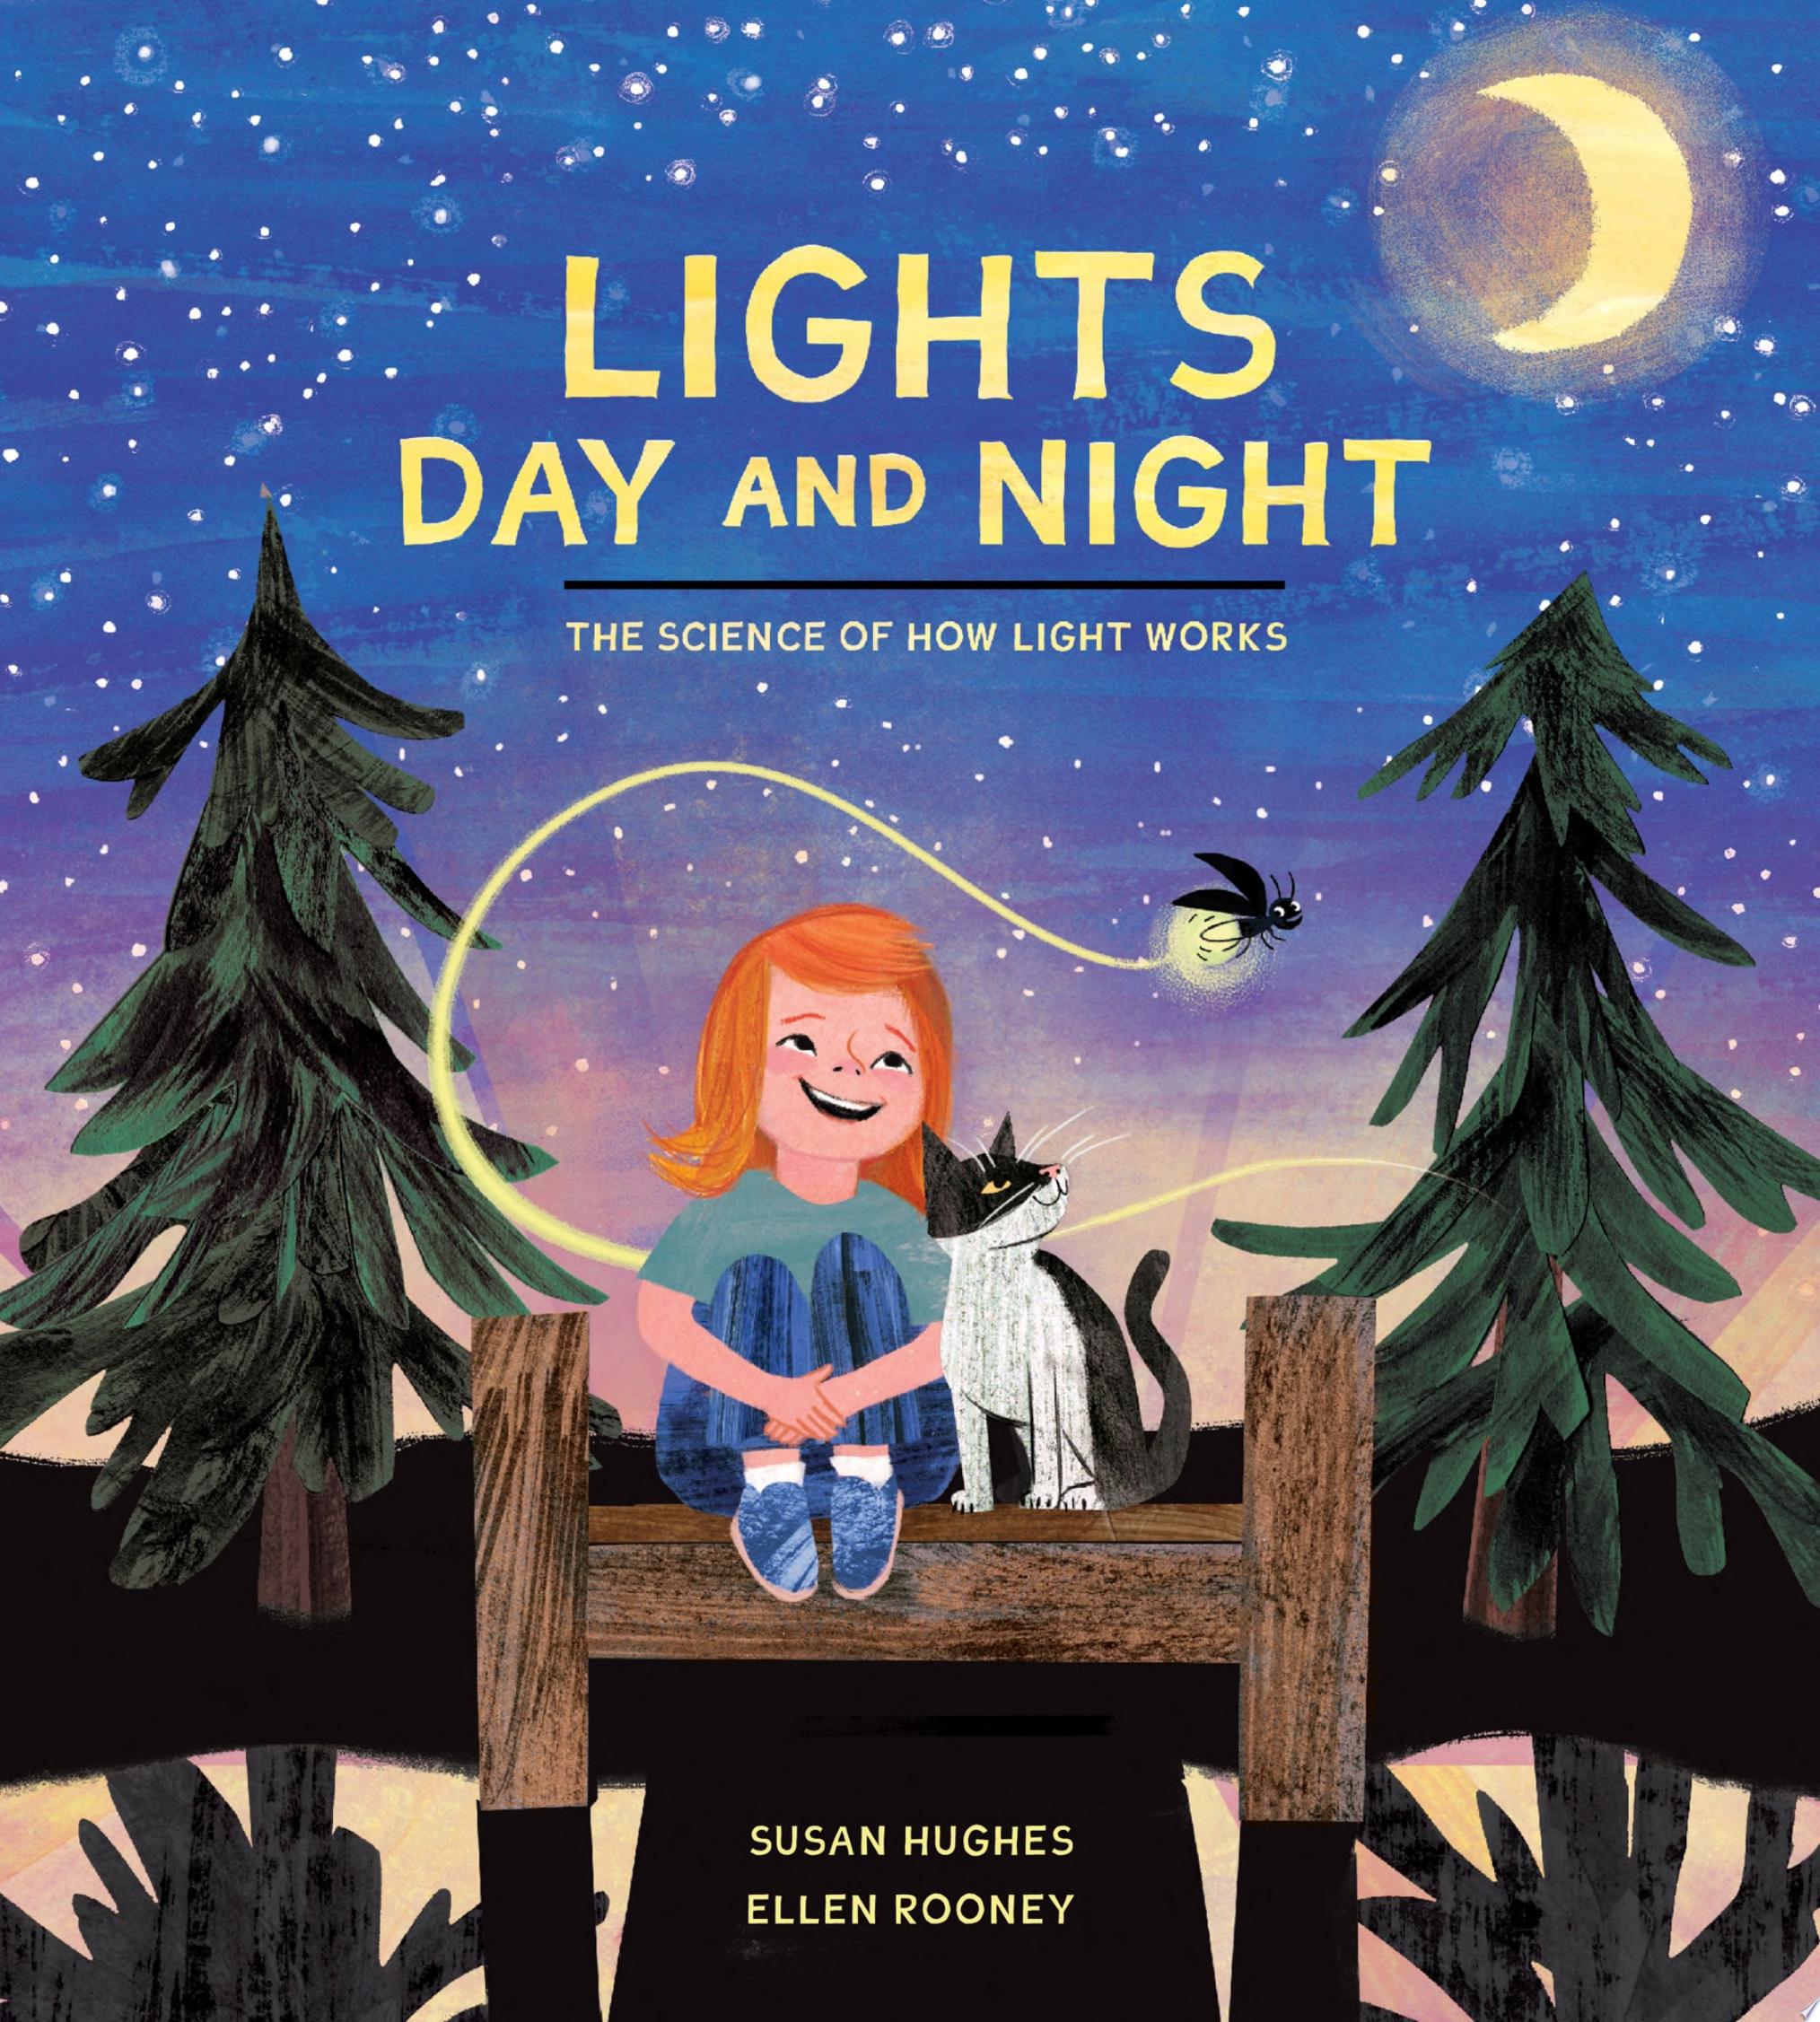 Image for "Lights Day and Night"